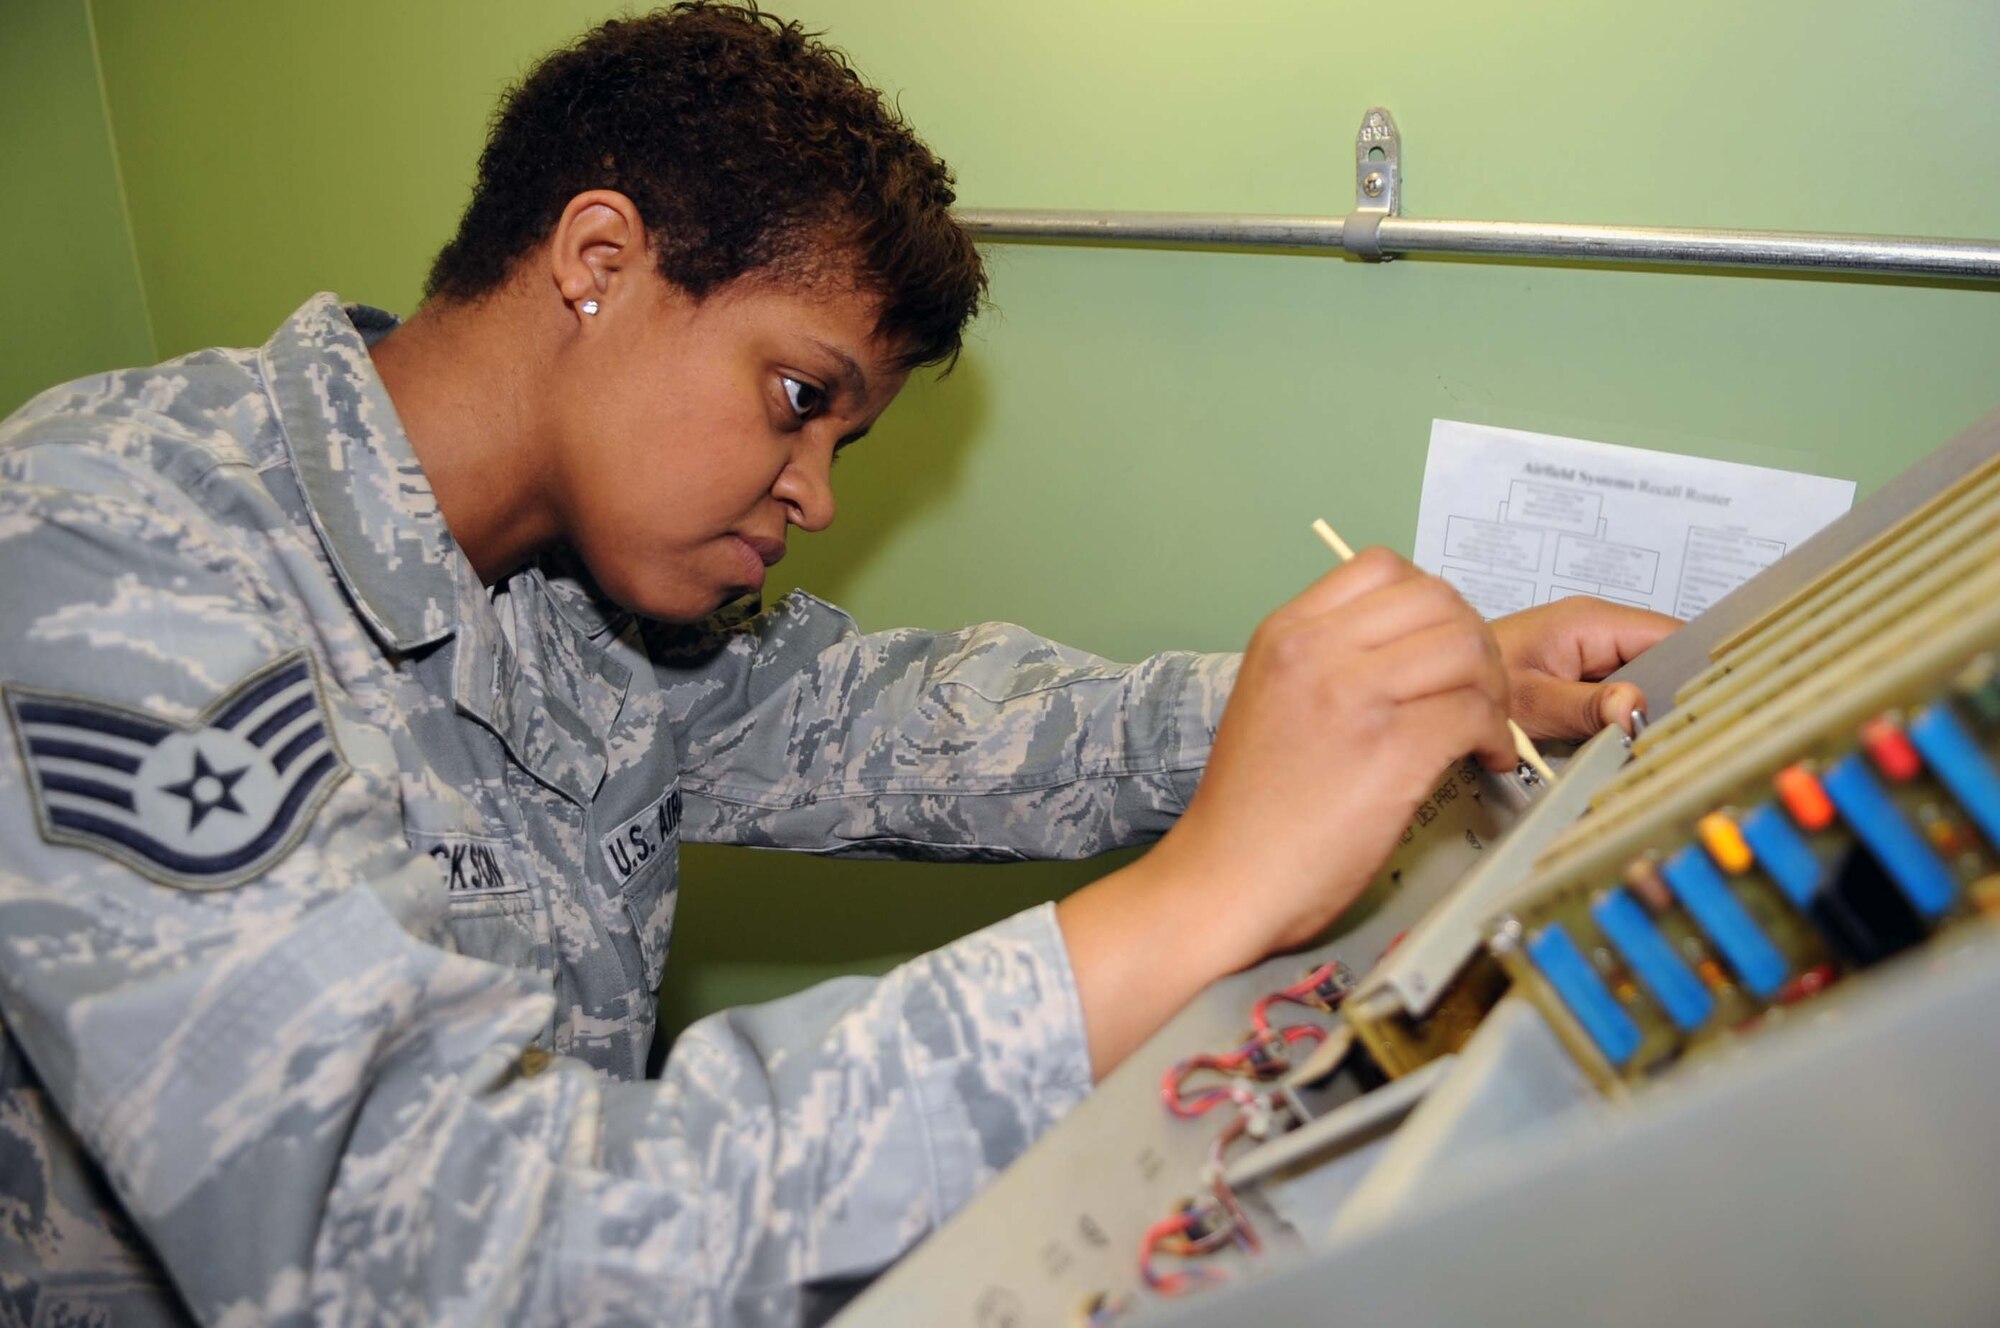 BARKSDALE AIR FORCE BASE, La. -- Staff Sgt. Desiree Jackson, 2d Communications Squadron airfield systems maintenance technician, adjusts the upper-alarm limit for percent of modulation on the 33 Glideslope March 23. This is an 84-day preventive maintenance inspection, which ensures airfield systems are operating effectively and up to Air Force standards.  (U.S. Air Force photo by Staff Sgt. John Gordinier)